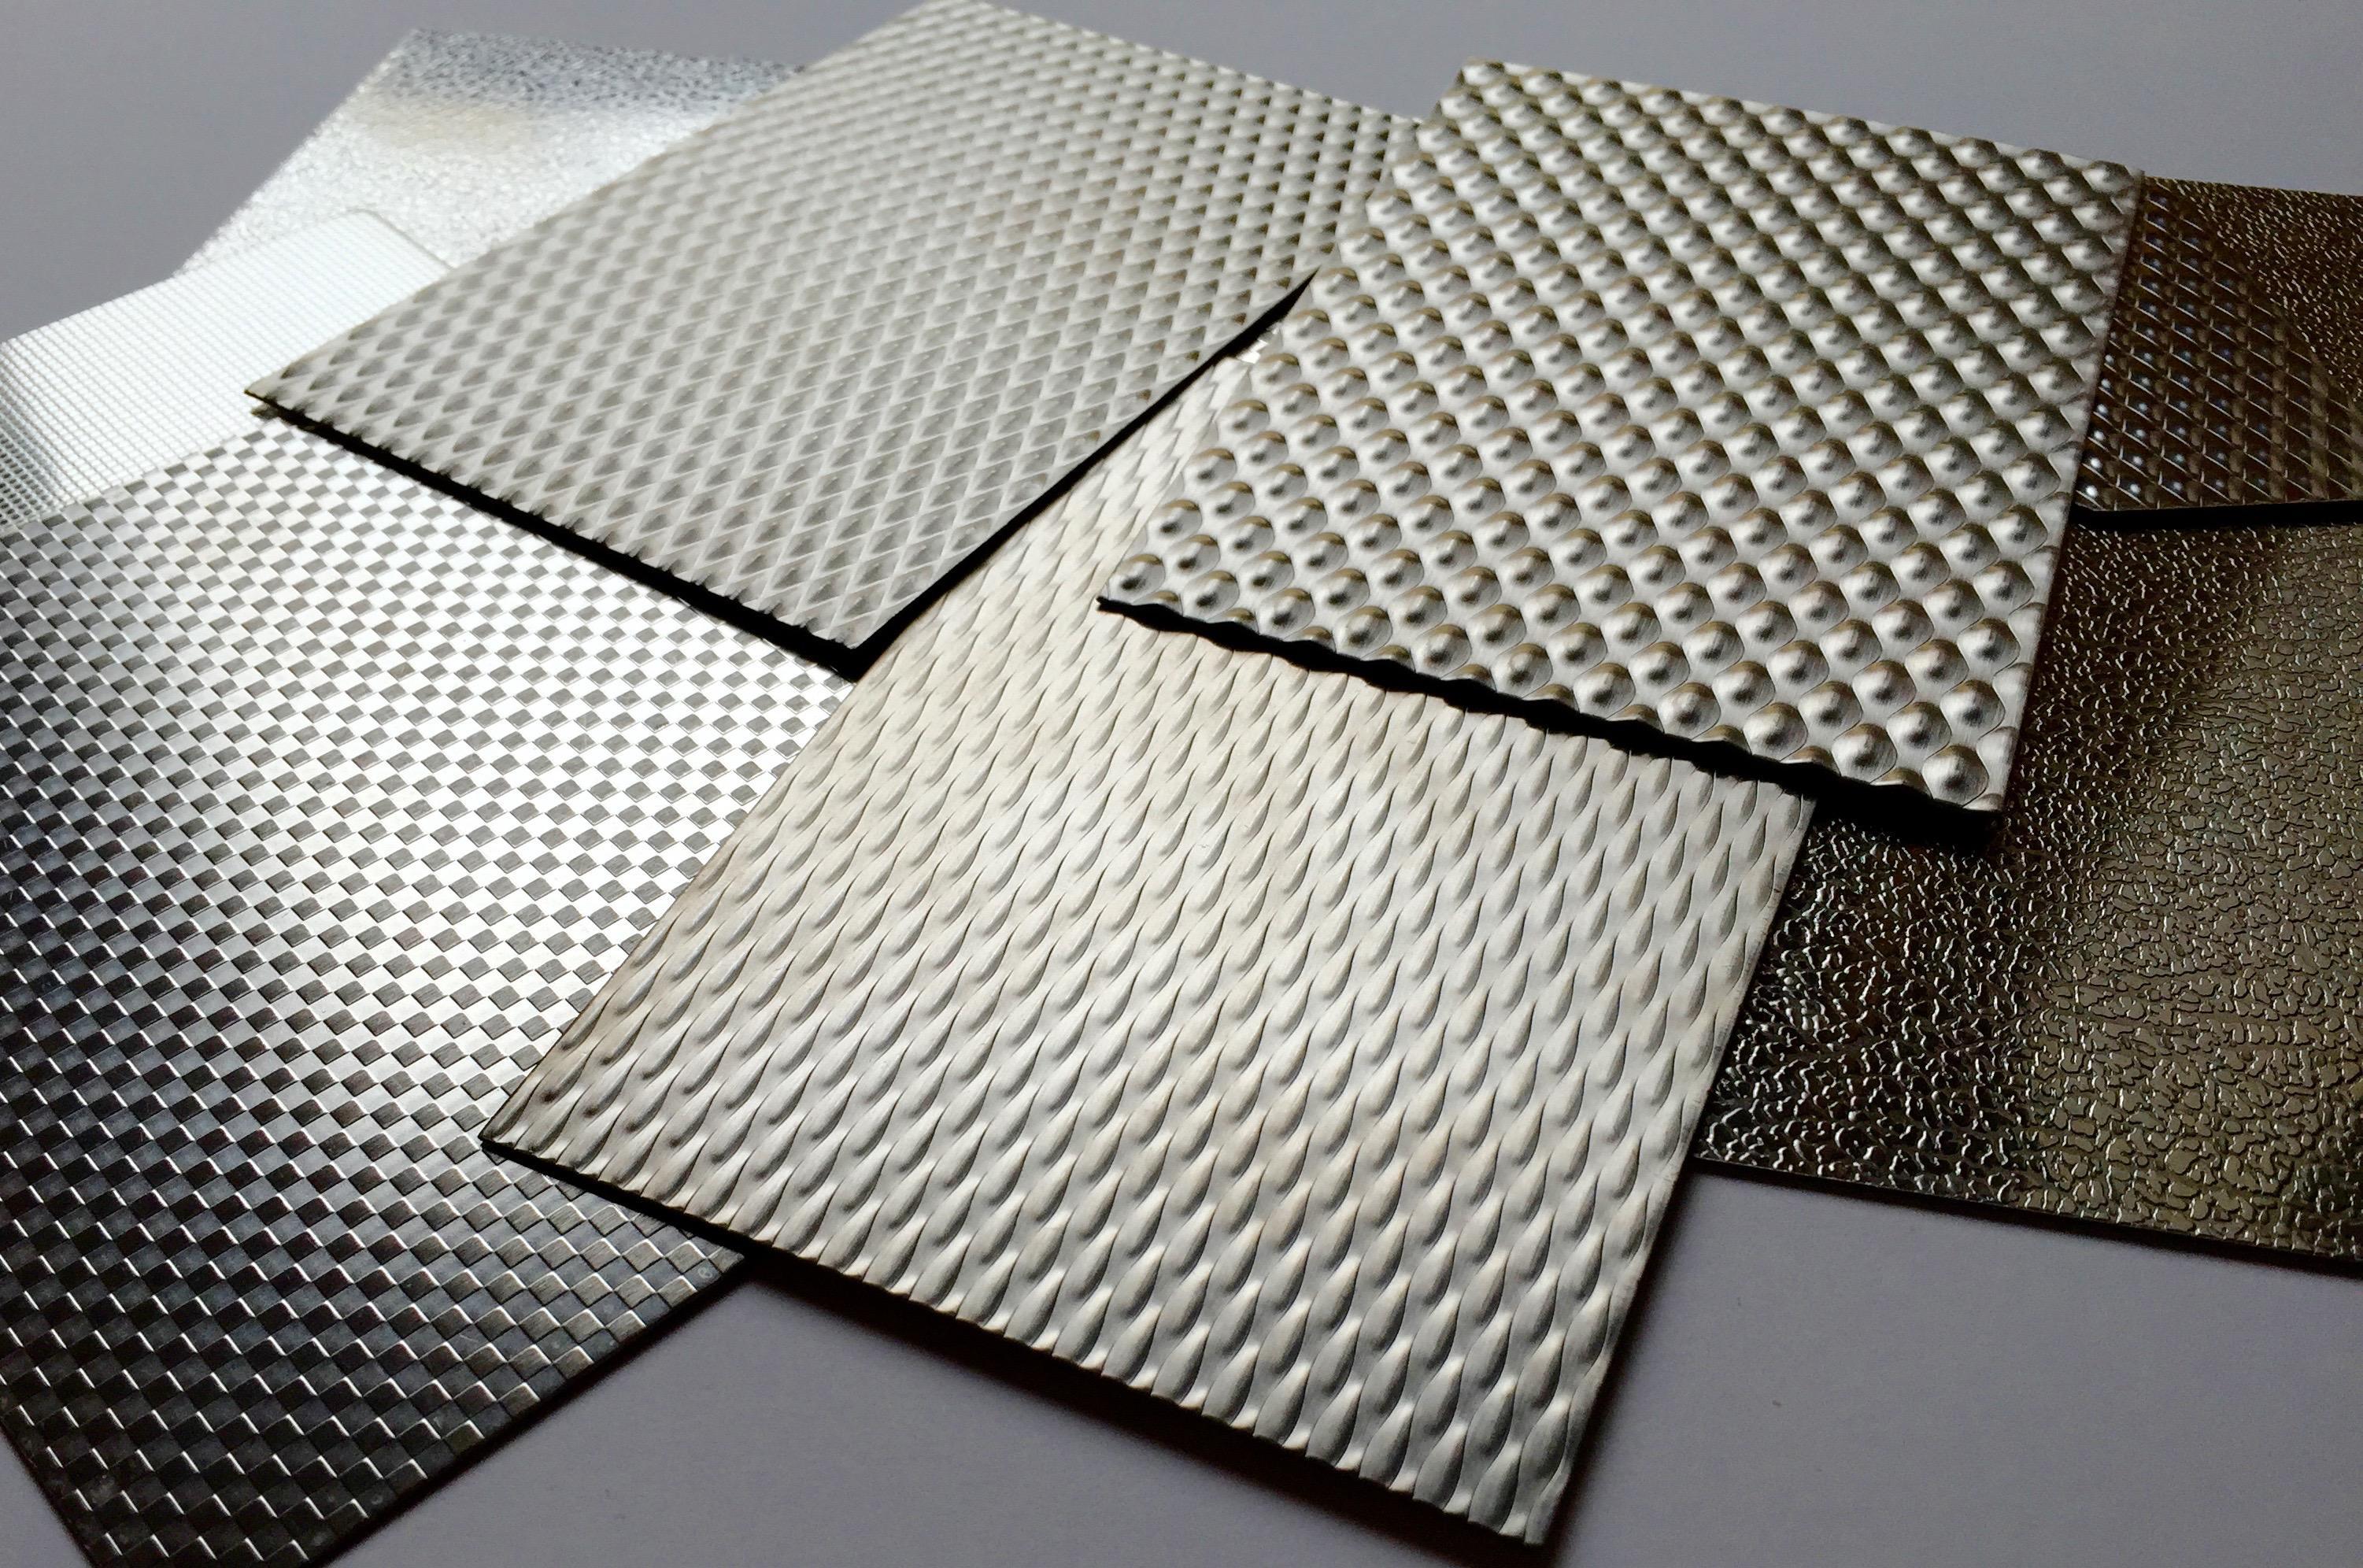 Products Decorative Embossed Metals L P S Lamiere Perforate Speciali